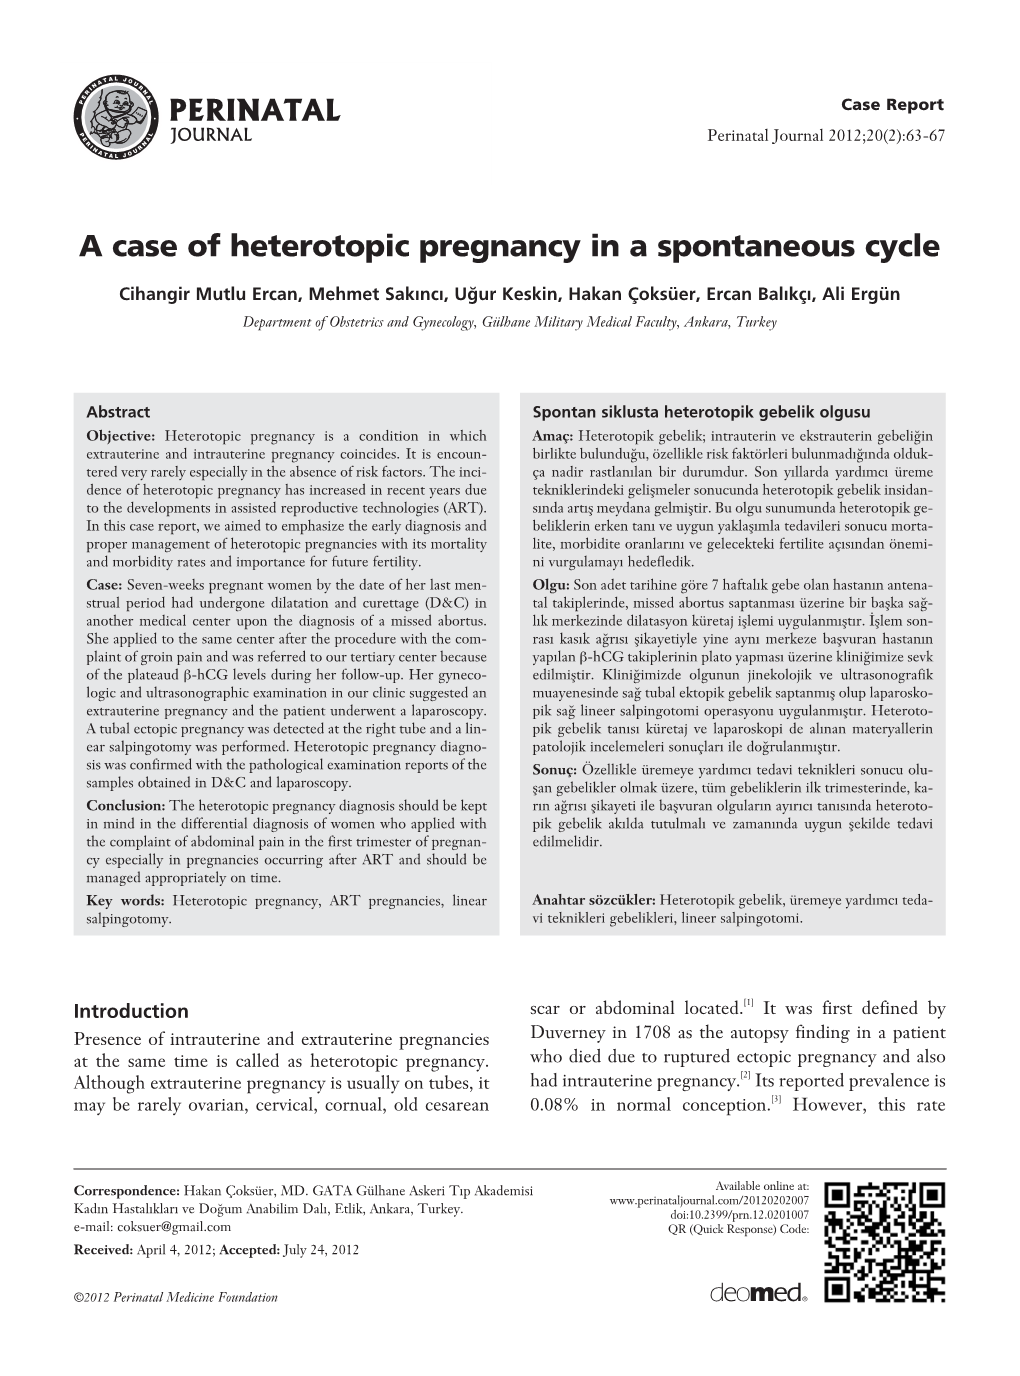 A Case of Heterotopic Pregnancy in a Spontaneous Cycle